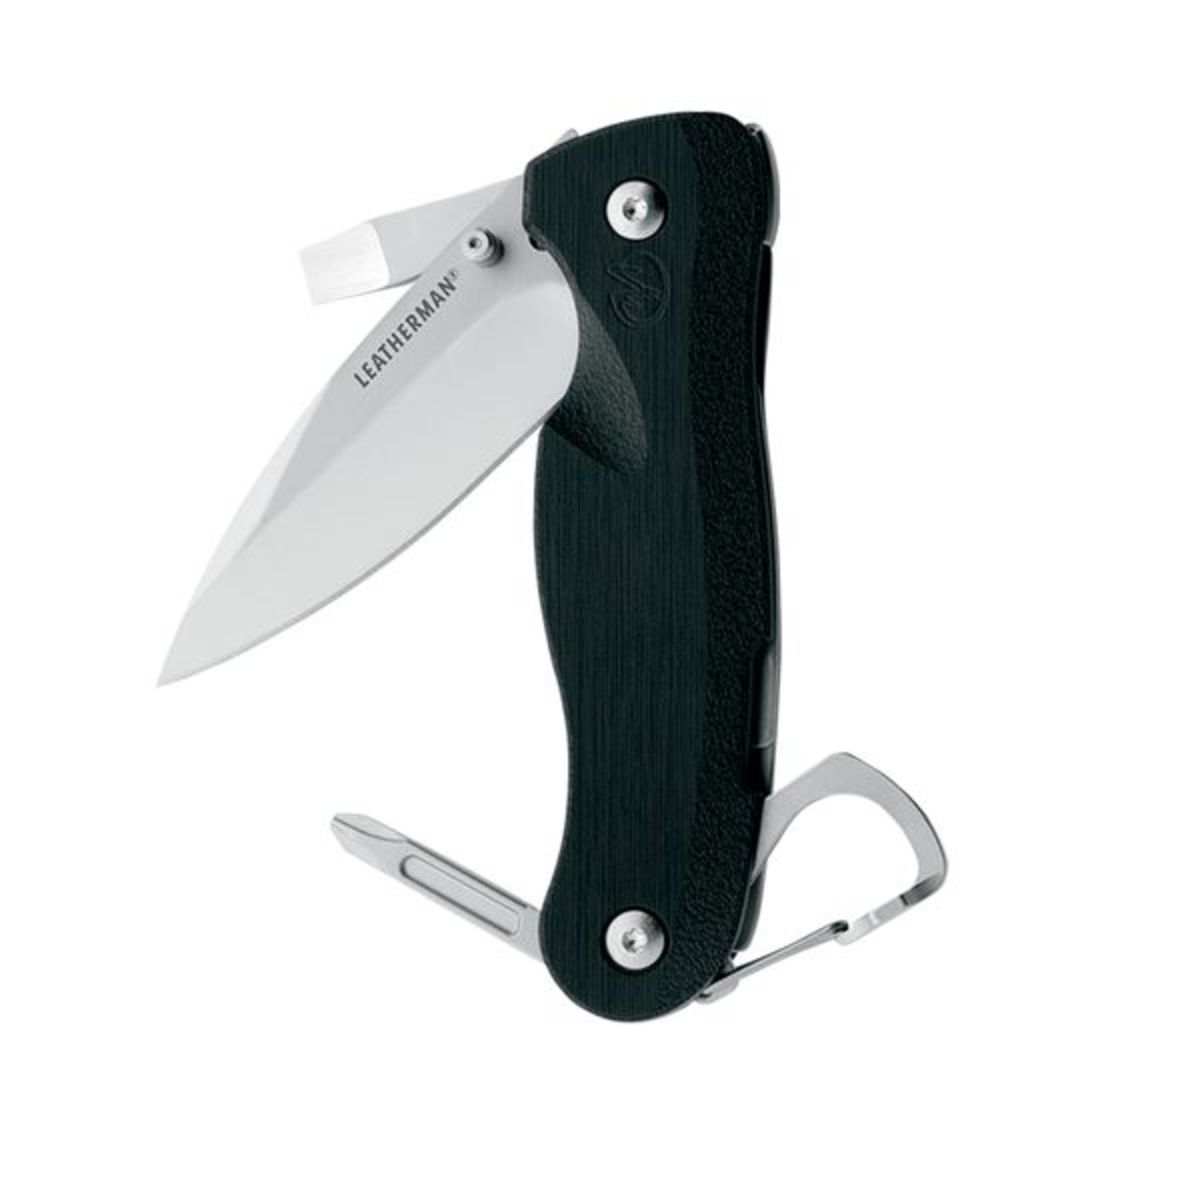 Leatherman Crater knives have extra implements, but it never shoots blades!